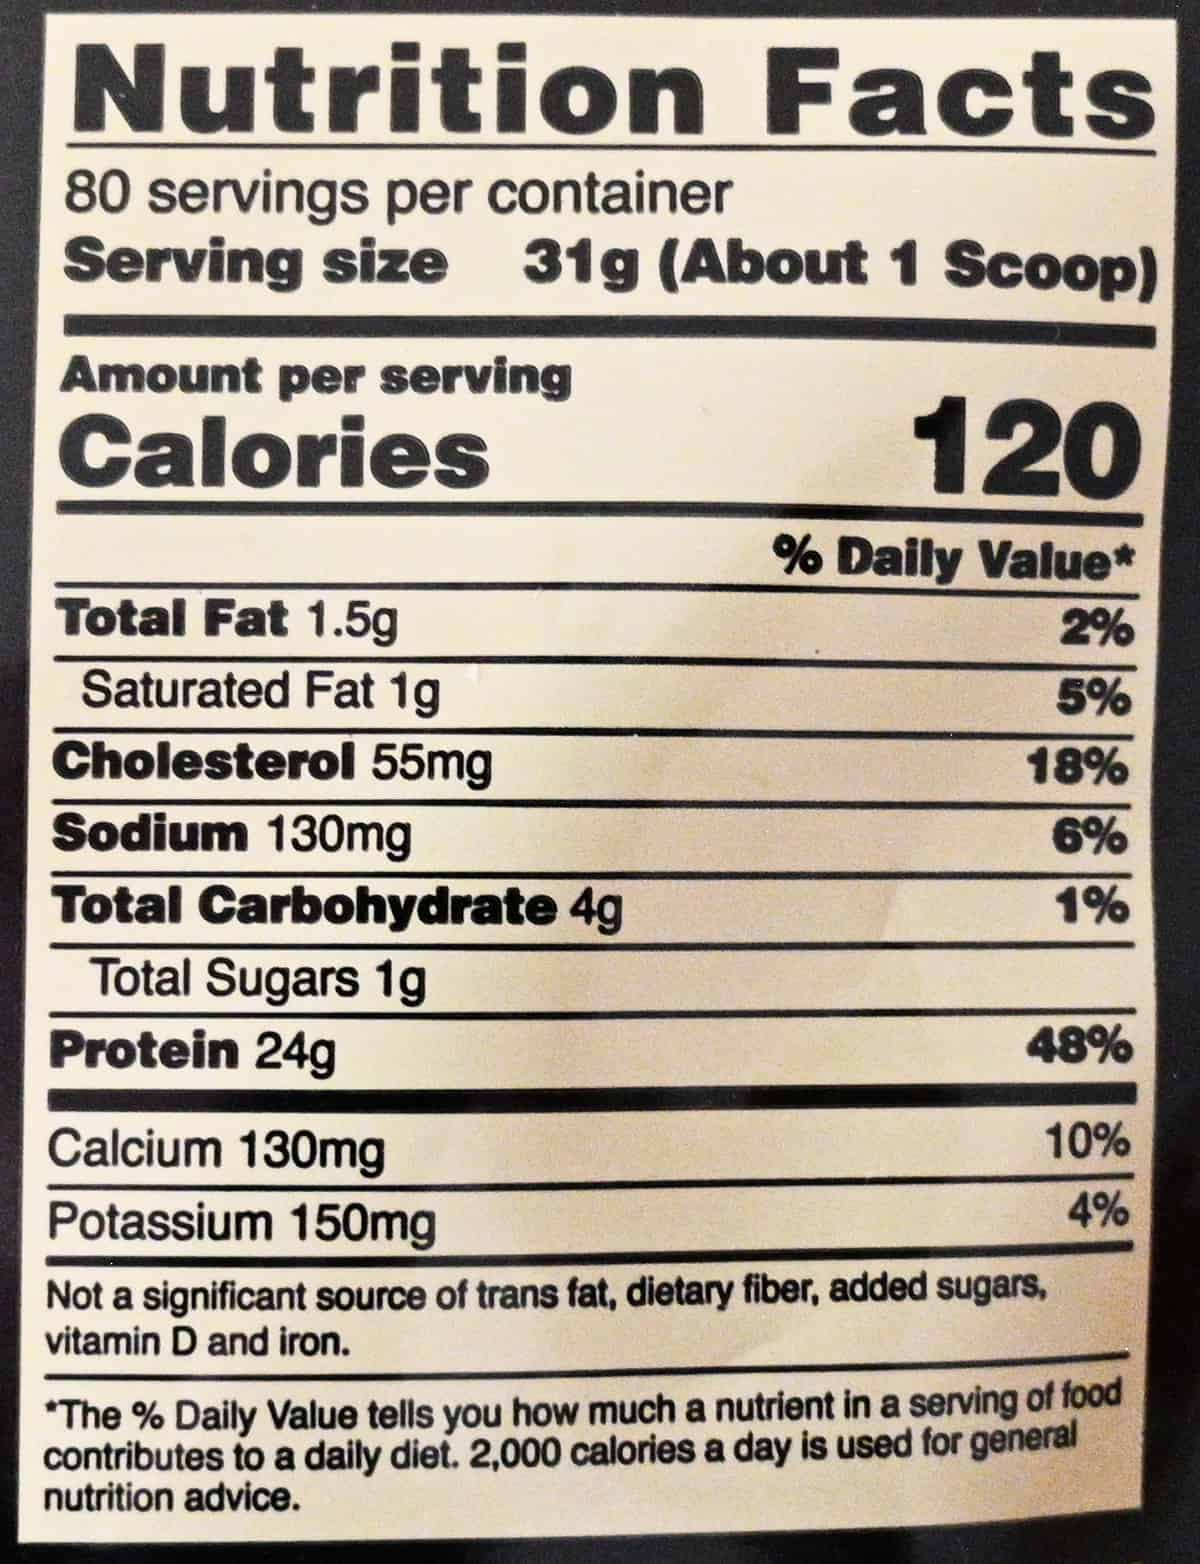 Image of the vanilla ice cream nutrition facts from the back of the bag.